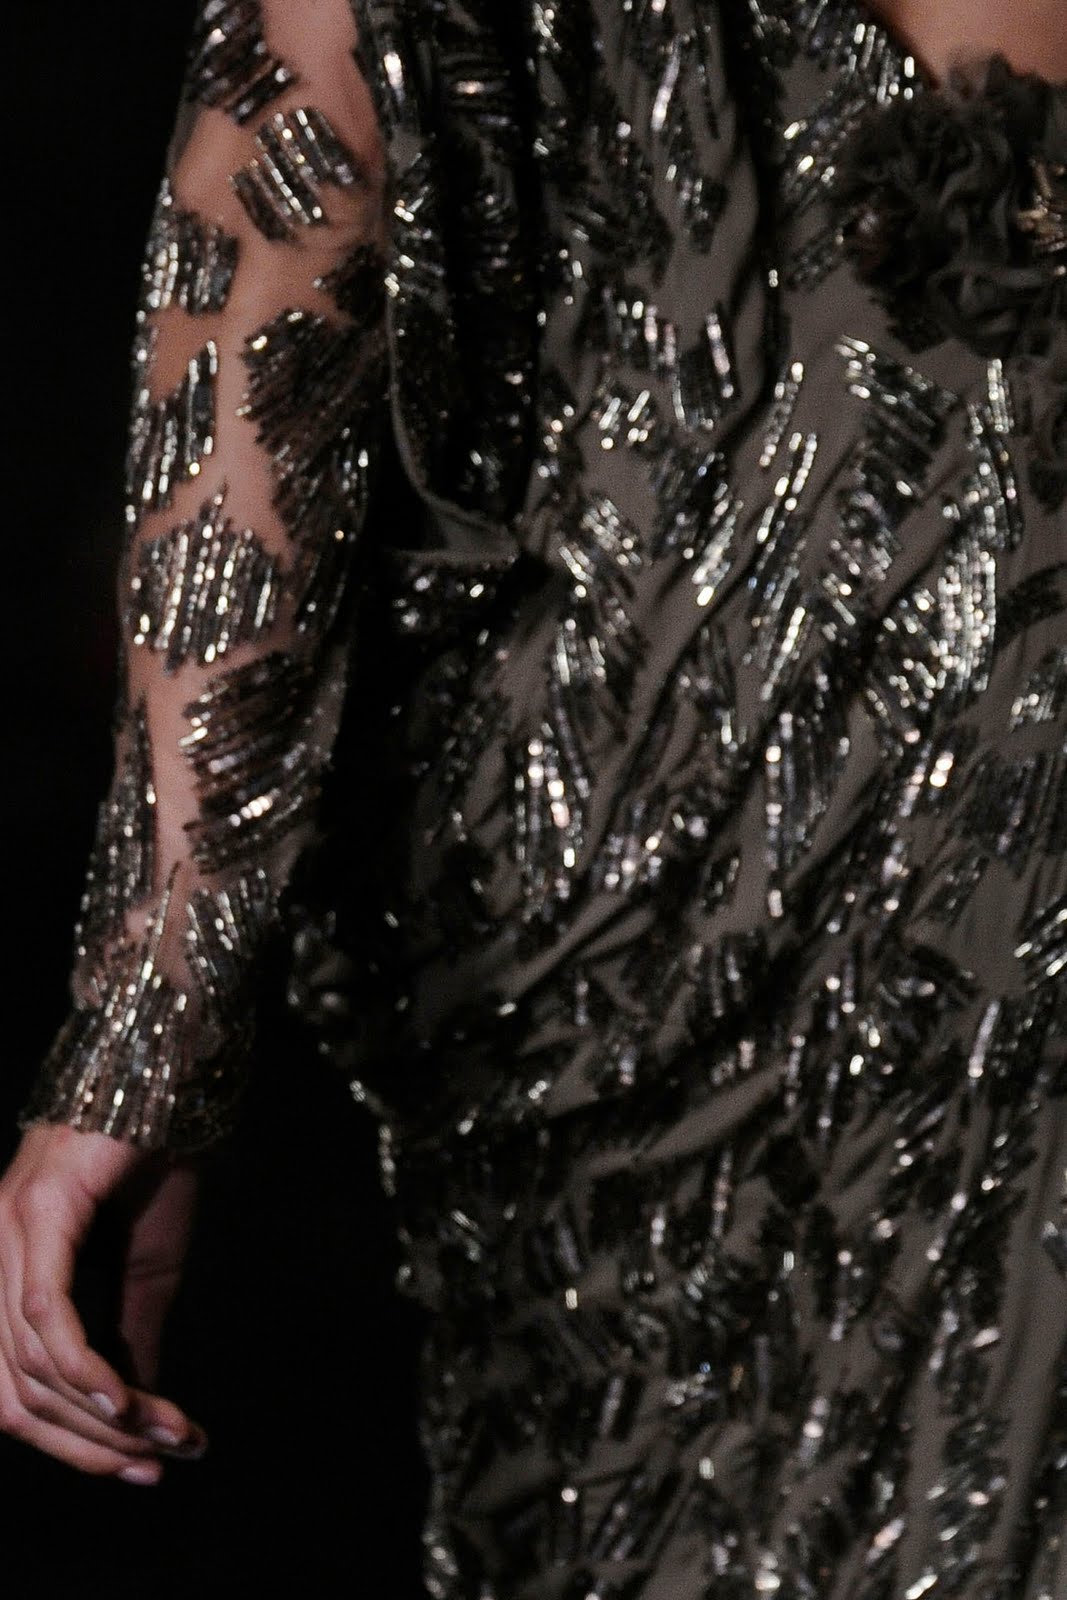 CHARMING: DETAILS for Elie Saab [Fall 2010 Couture]